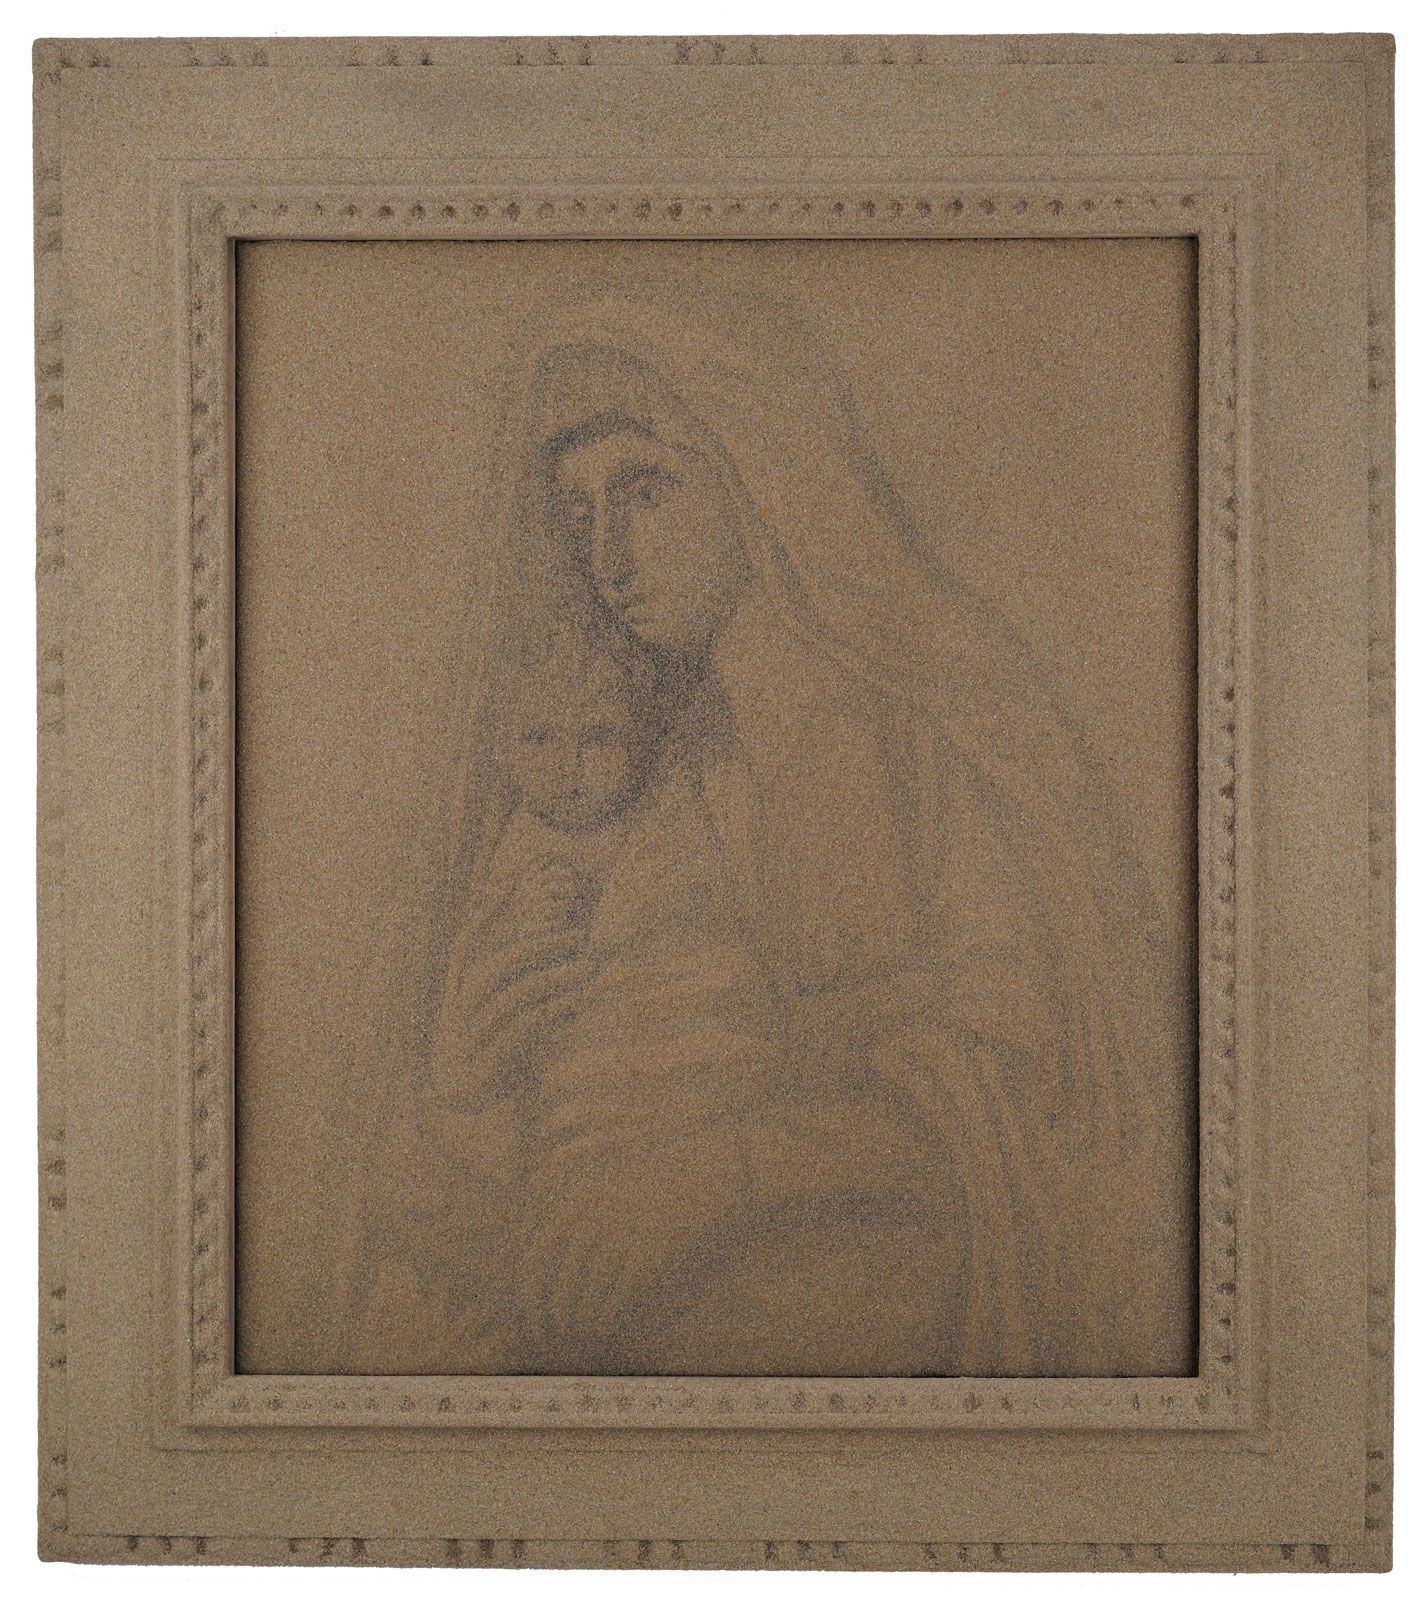 Madonna and child painted from Quartz sand with sand frame.